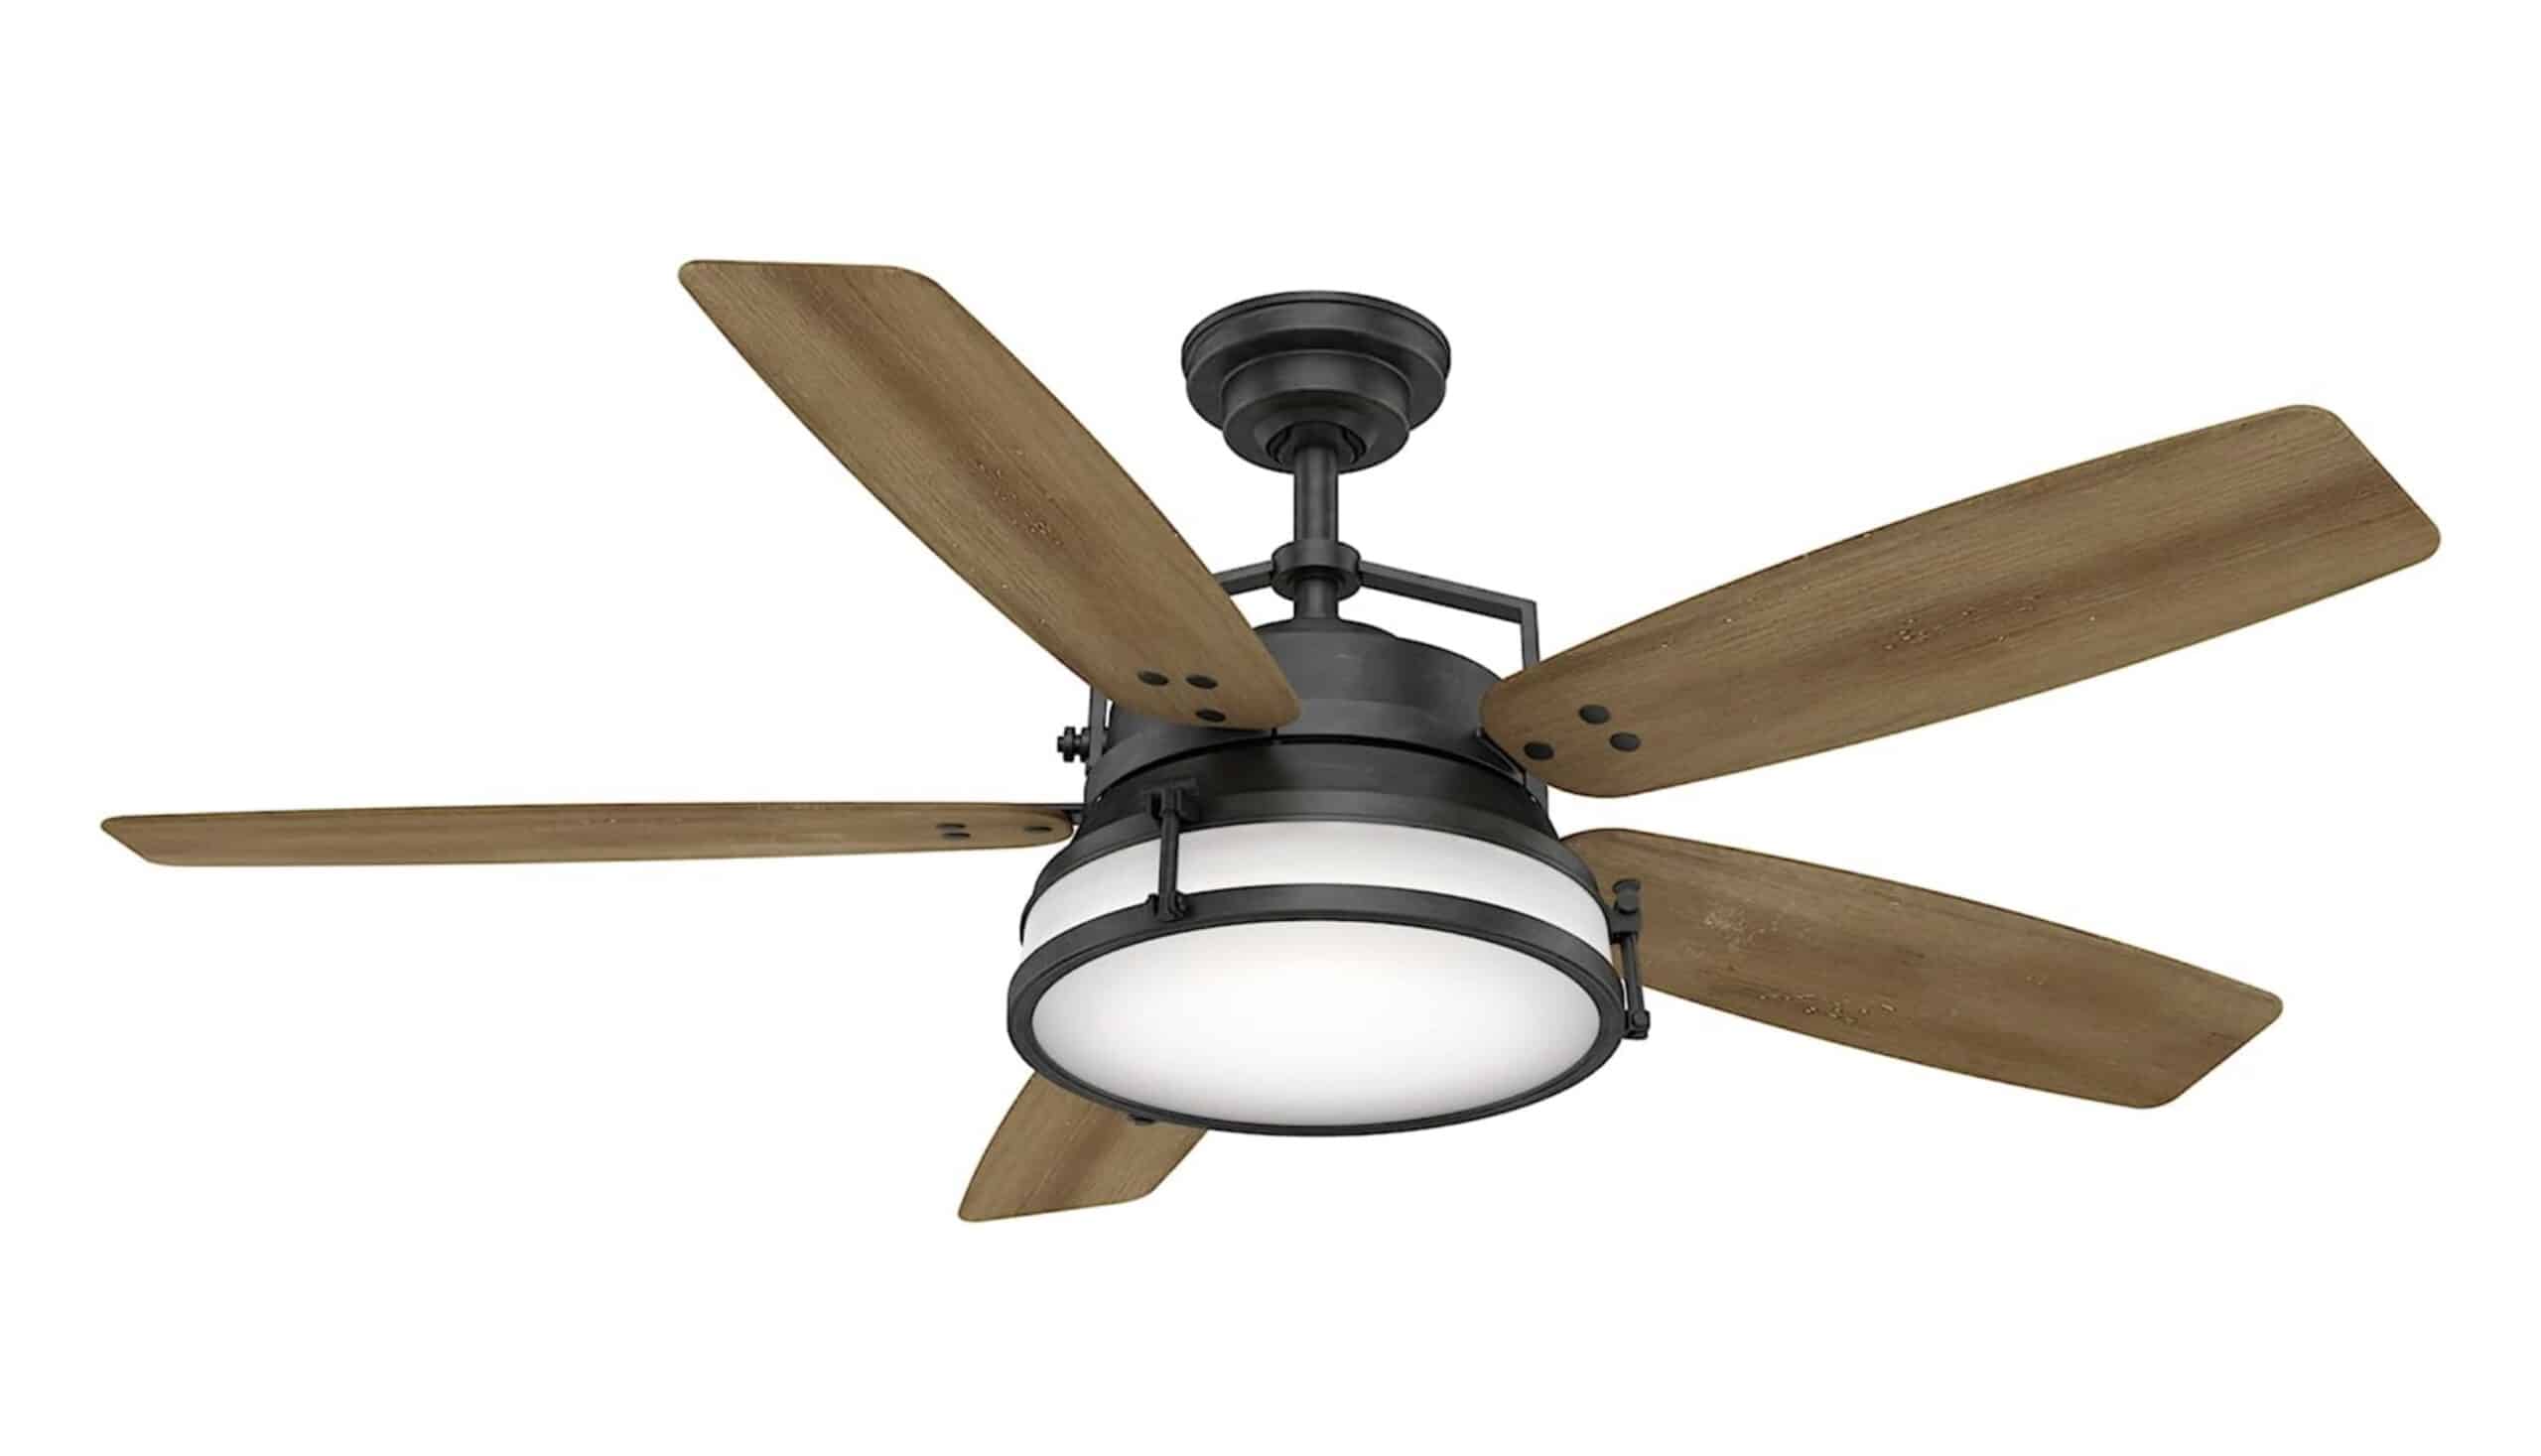 Casablanca Caneel Bay Indoor / Outdoor Ceiling Fan with LED Light and Wall Control